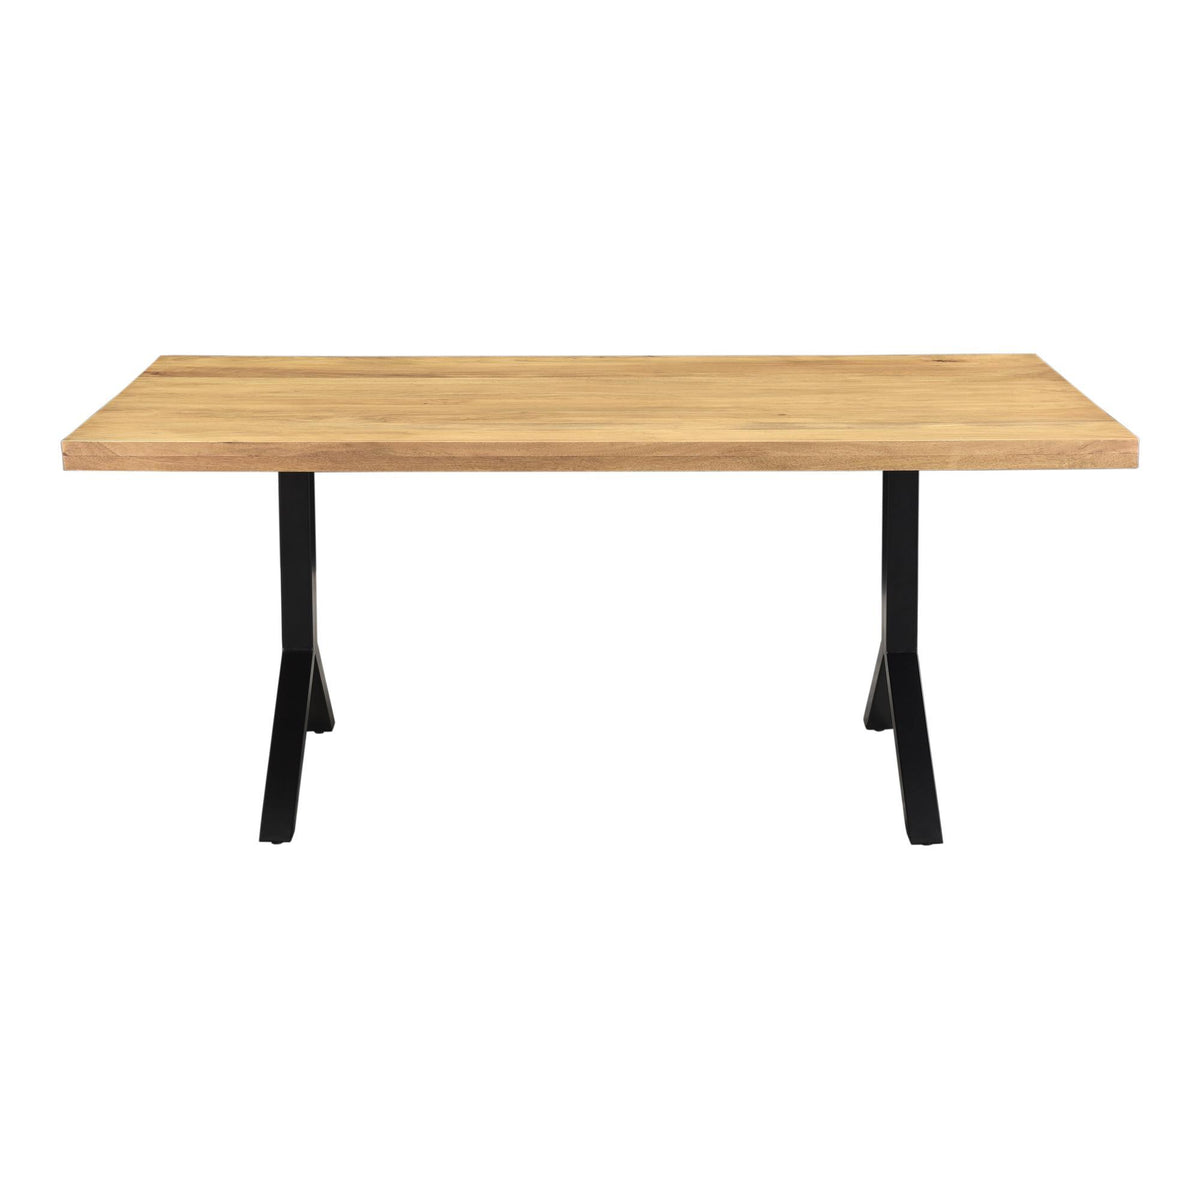 Moe's Home Collection Trix Dining Table Honey Oak - BV-1018-24